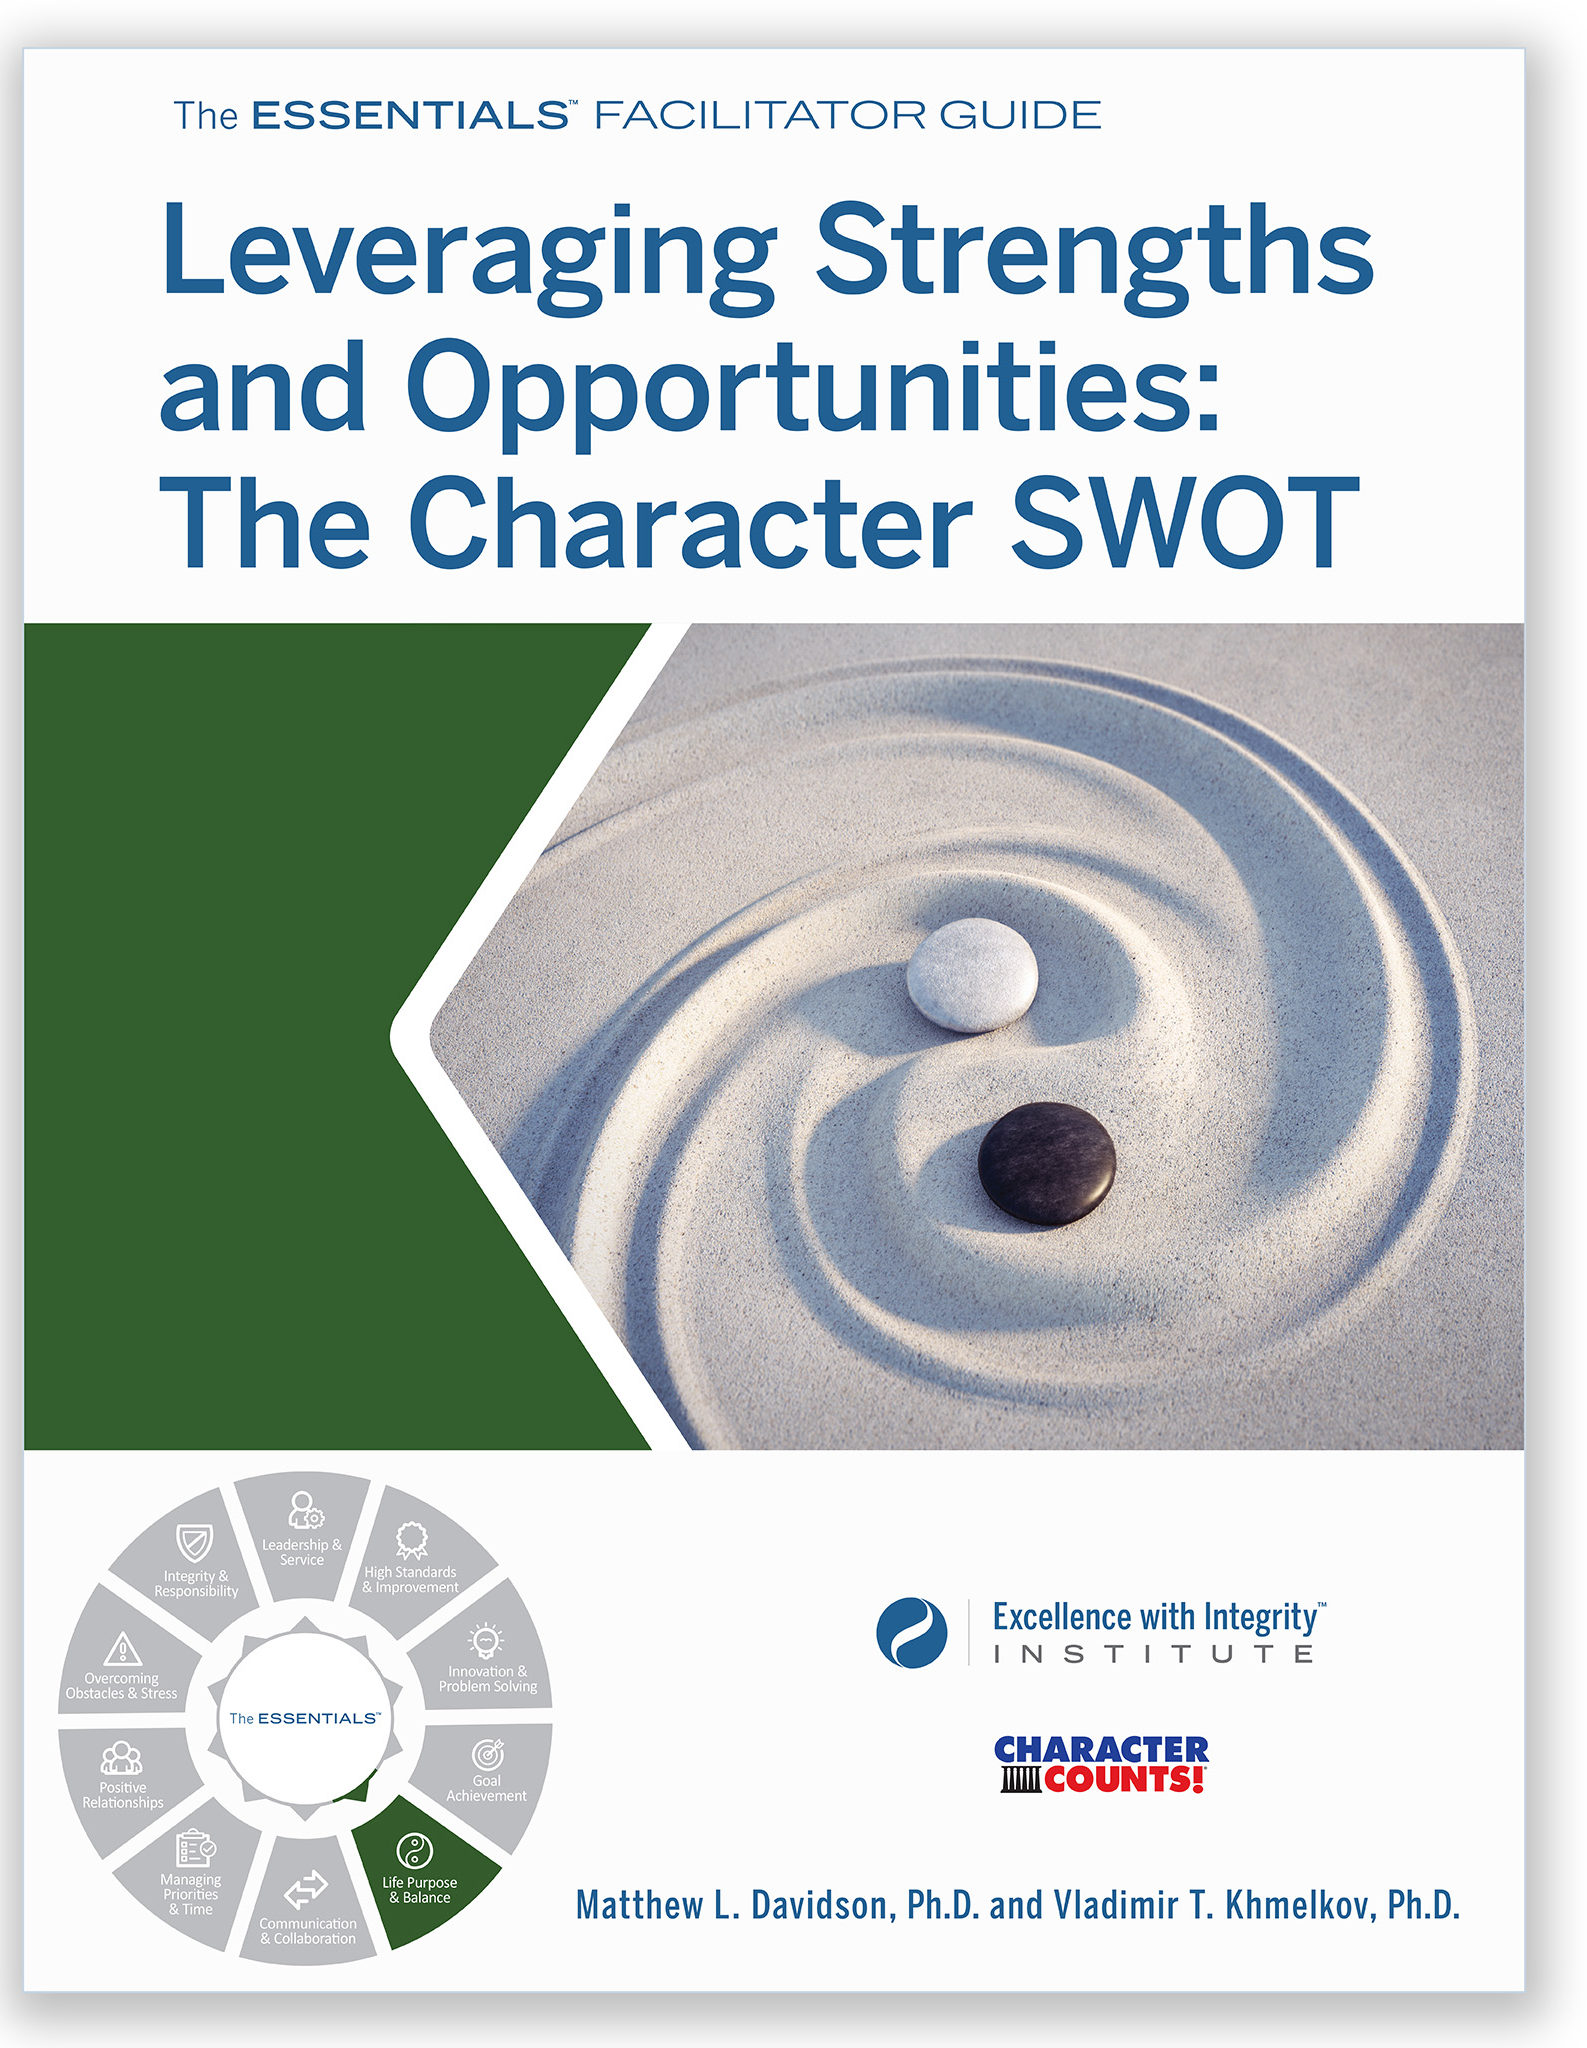 Leveraging Strengths and Opportunities: The Character SWOT